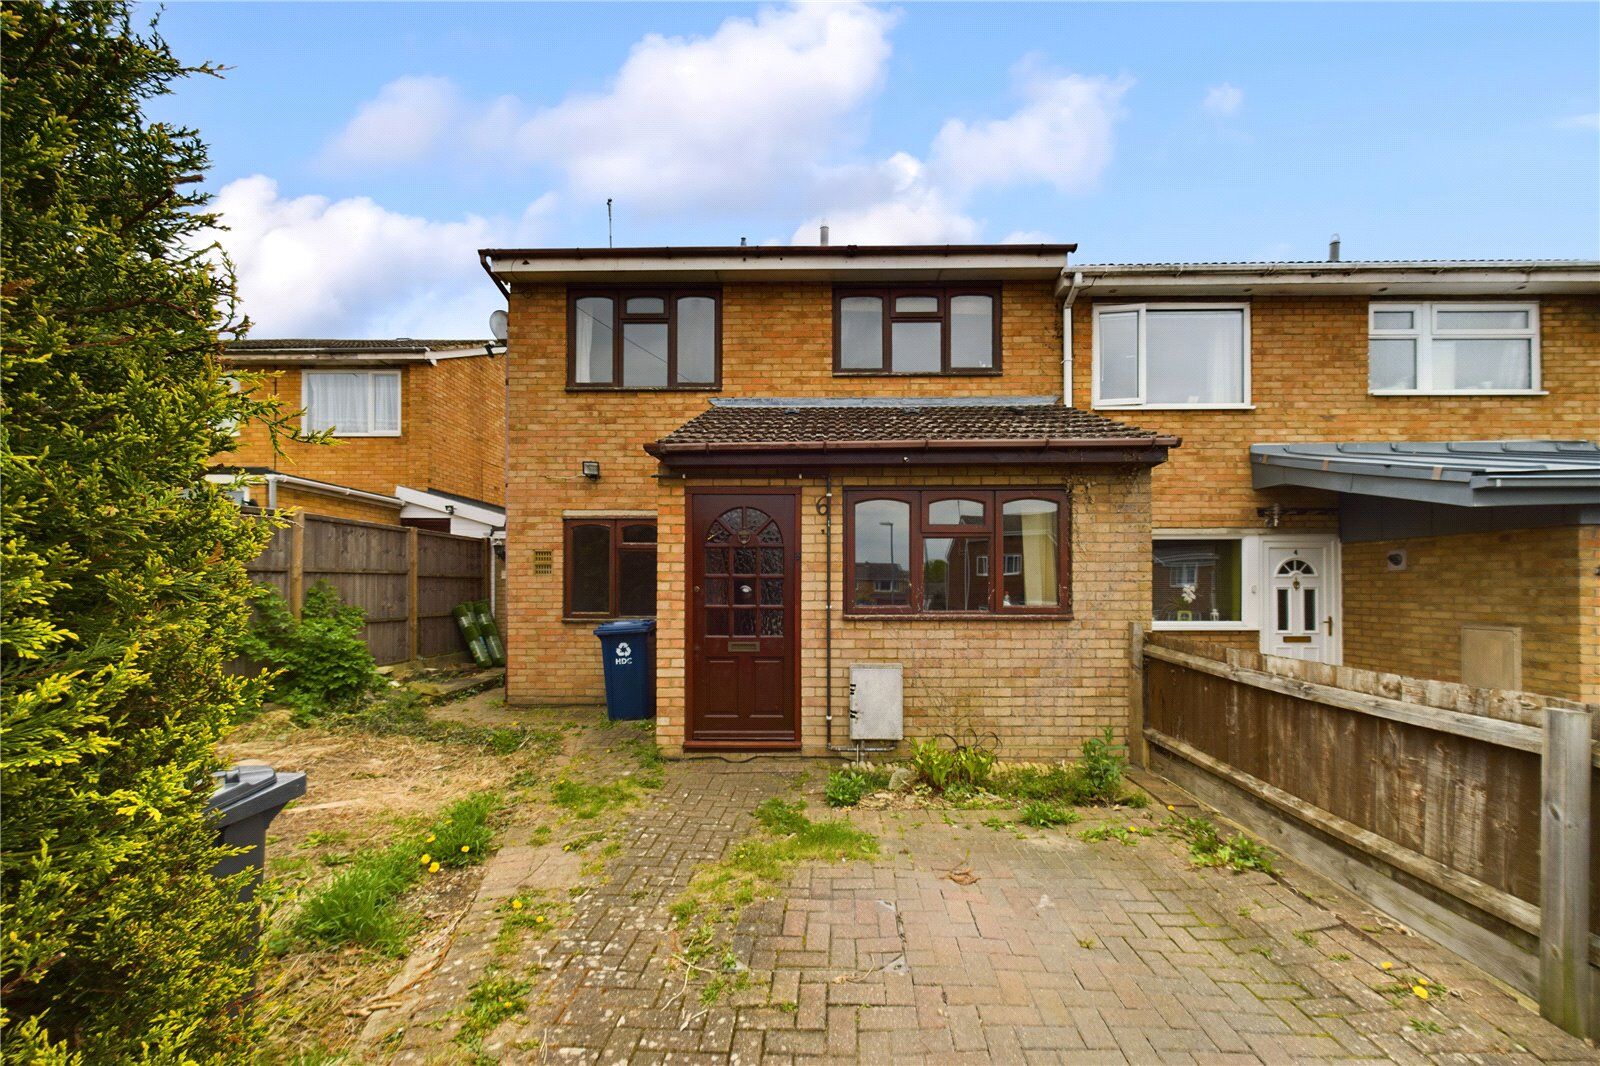 3 bedroom end terraced house for sale Meadow How, St. Ives, PE27, main image